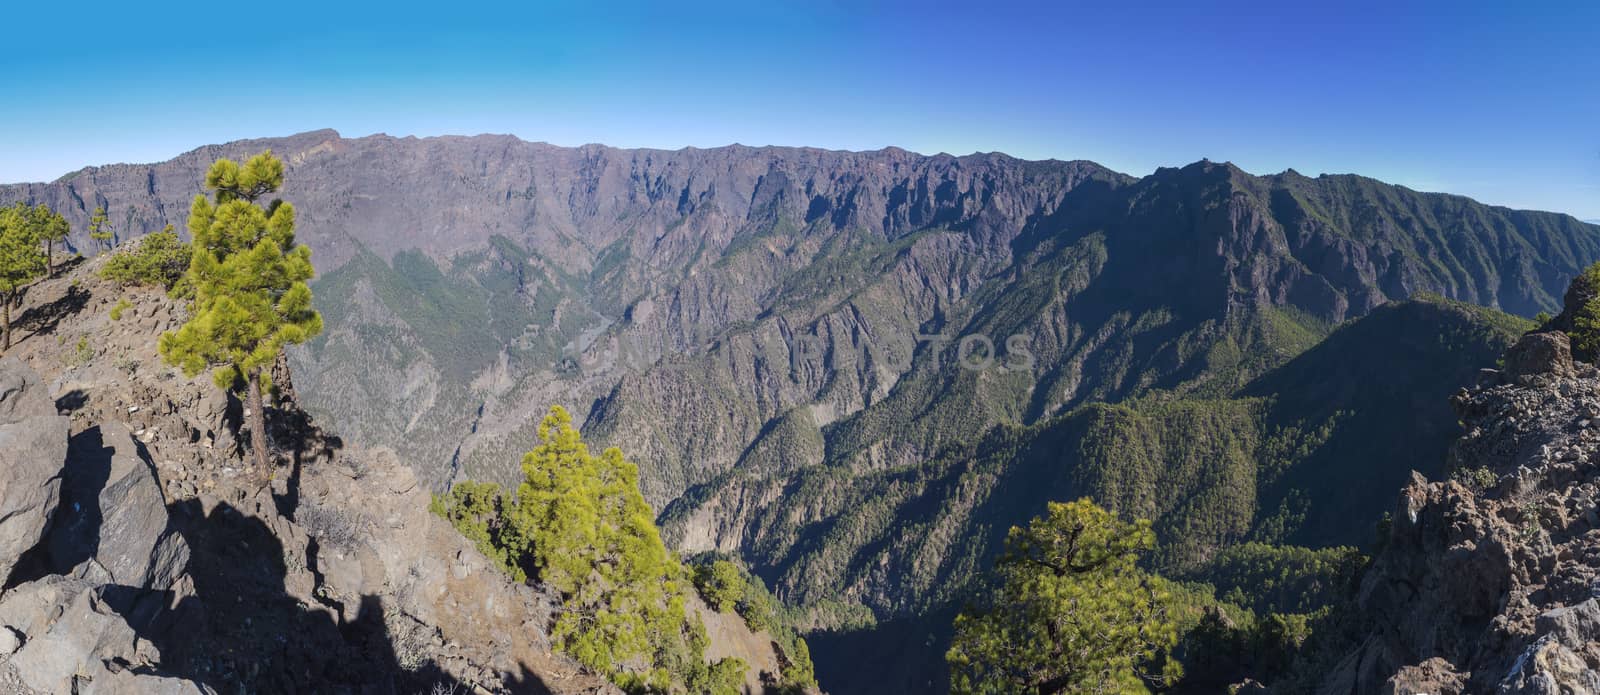 Beautiful volcanic landscape with lush green pine trees and colorful volcanoes along the path Ruta de los Volcanes, beautiful hiking trail at La Palma island, Canary Islands, Spain, Blue sky background.